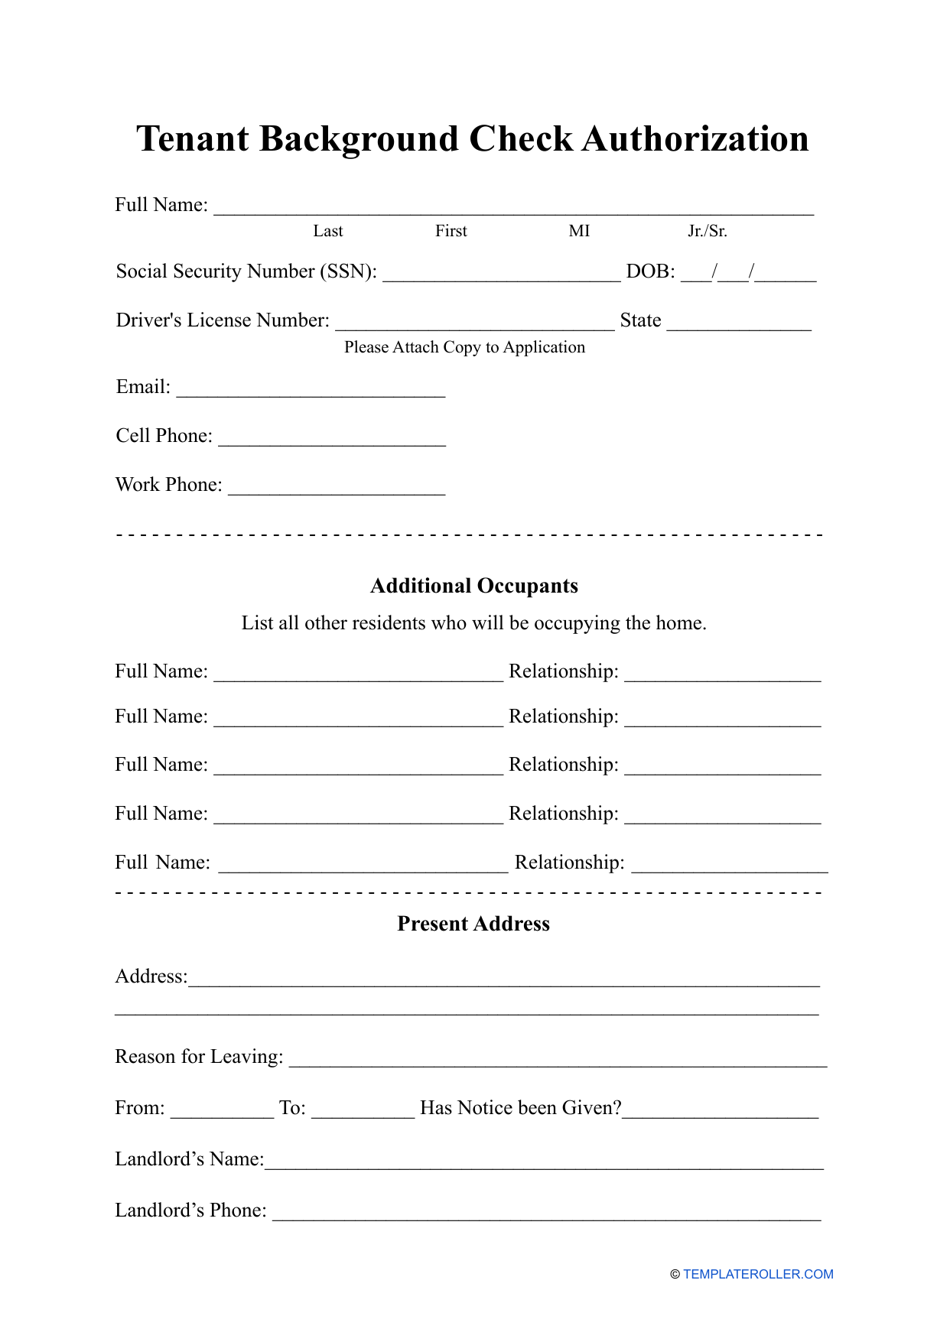 Tenant Background Check Form, Page 1